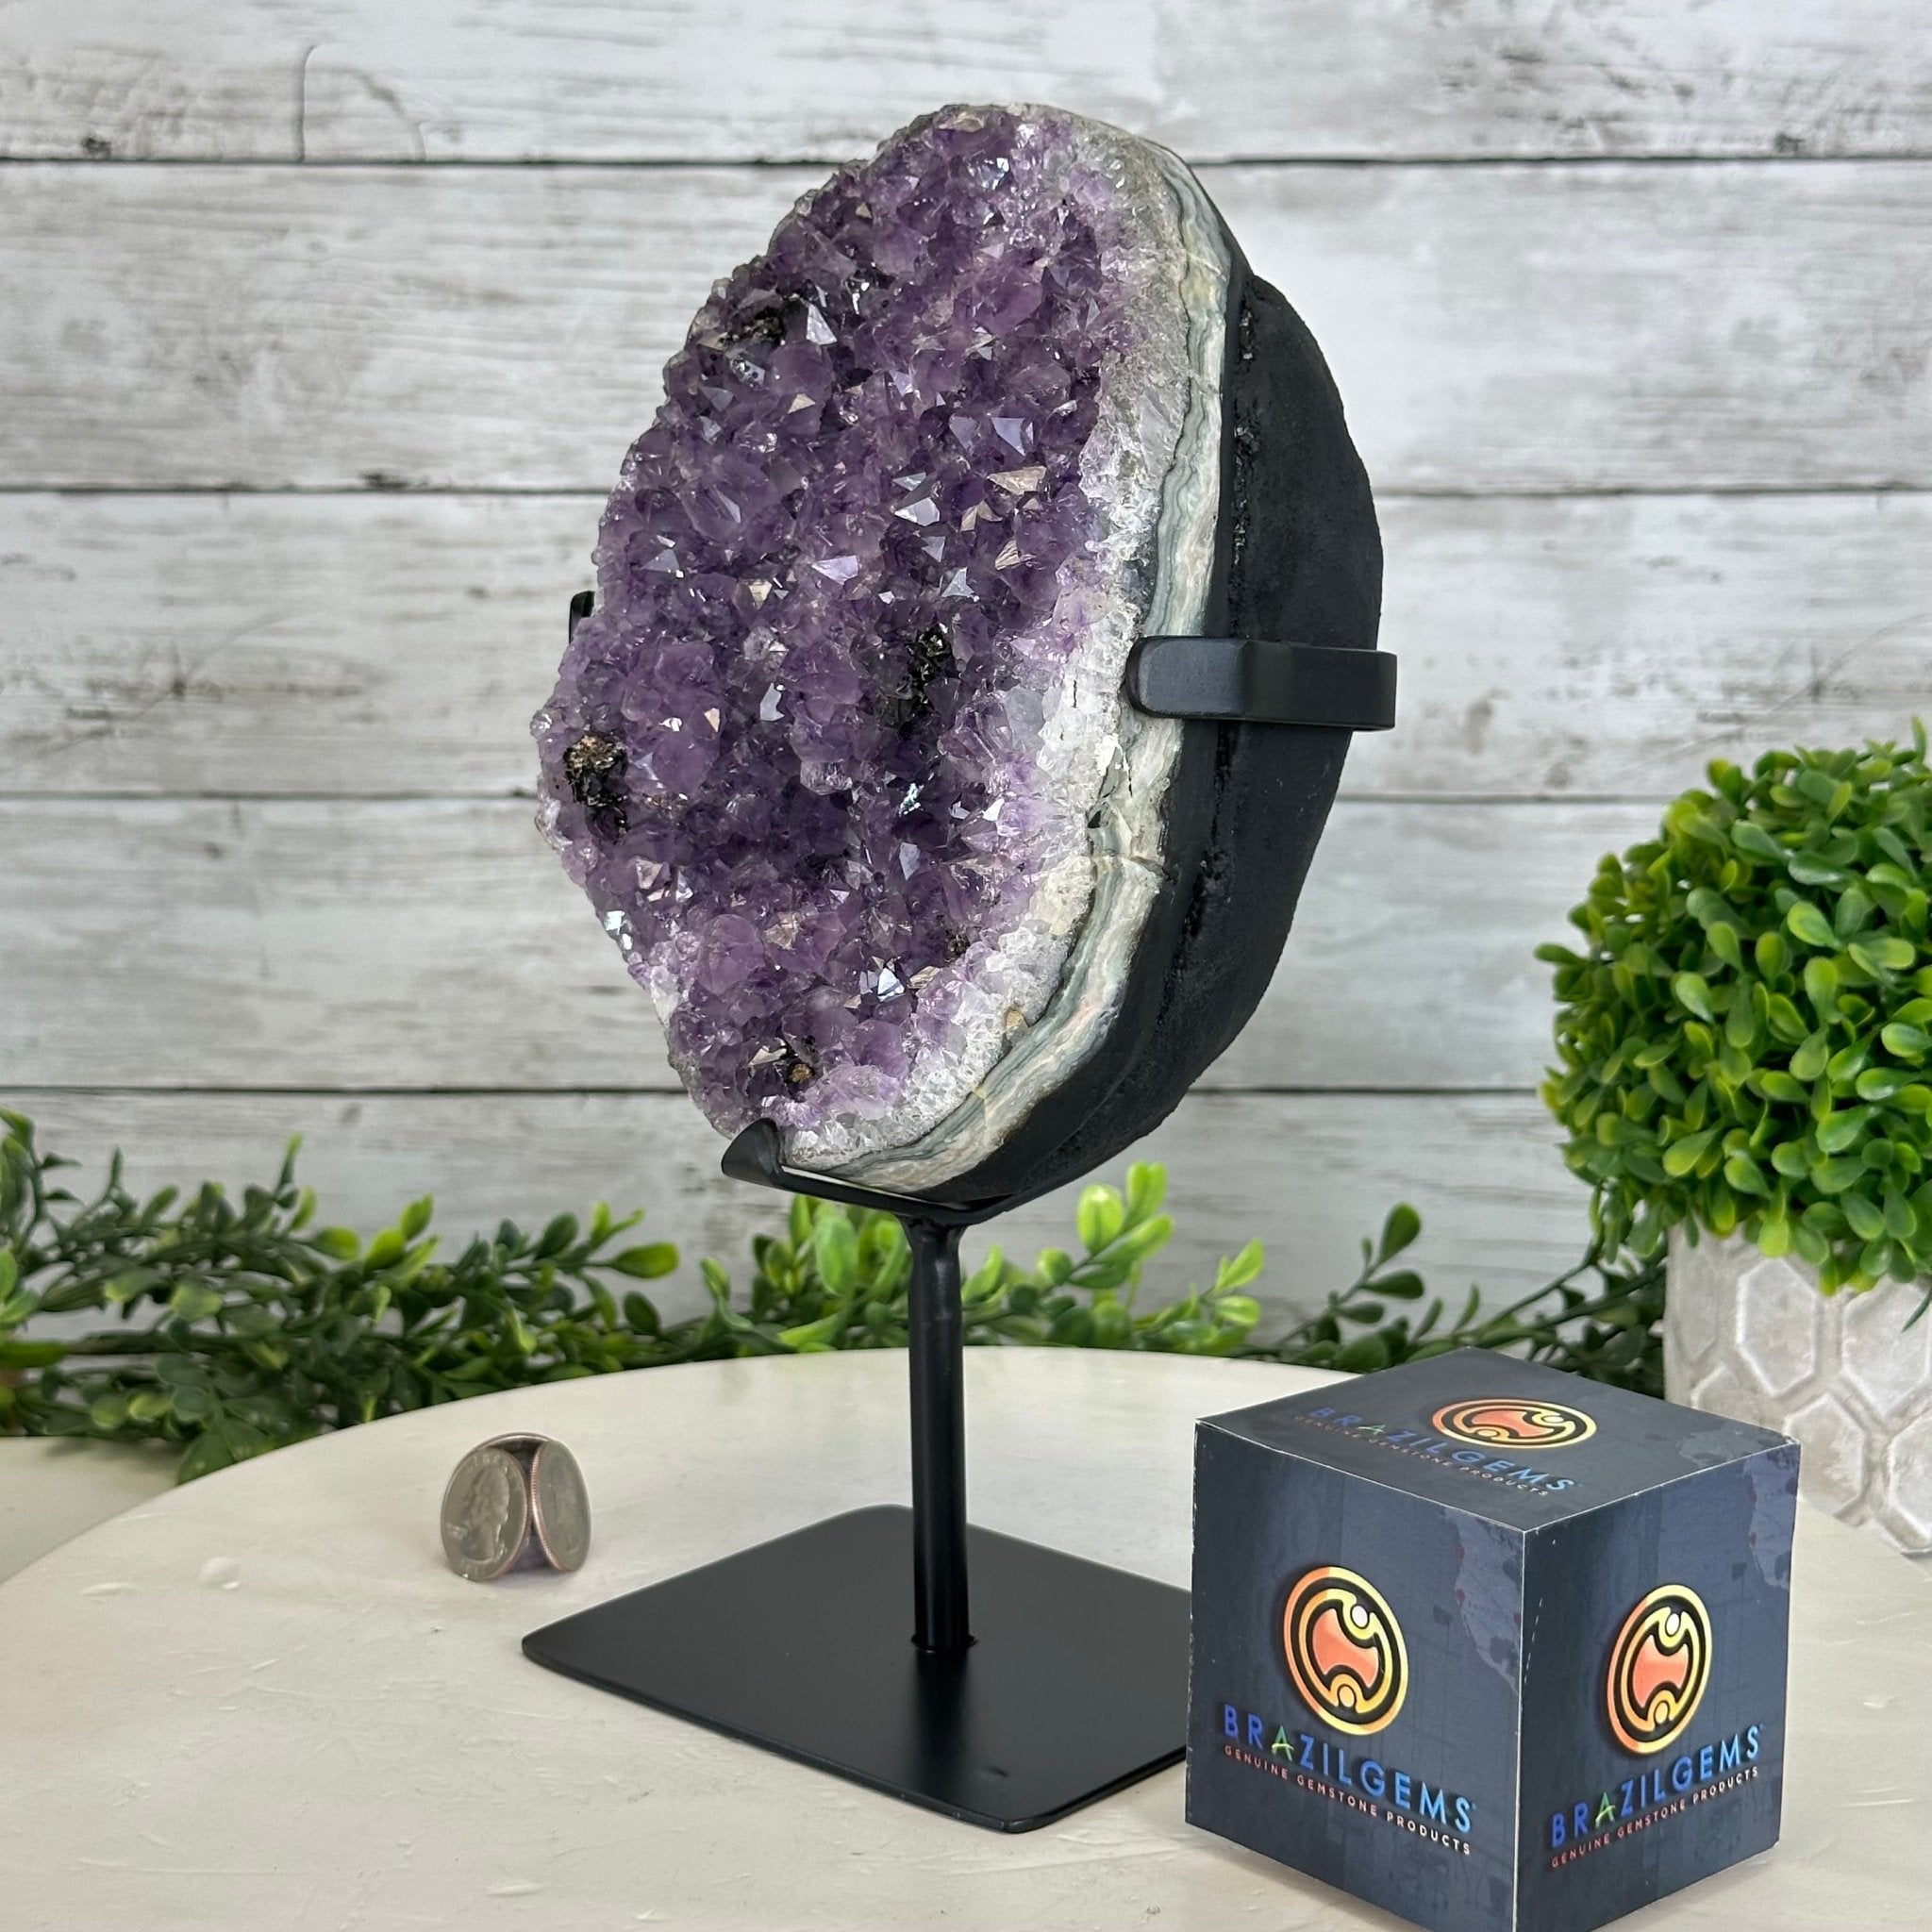 Quality Amethyst Cluster on a Metal Base, 8.5 lbs & 10.5" Tall #5491 - 0050 - Brazil GemsBrazil GemsQuality Amethyst Cluster on a Metal Base, 8.5 lbs & 10.5" Tall #5491 - 0050Clusters on Fixed Bases5491 - 0050